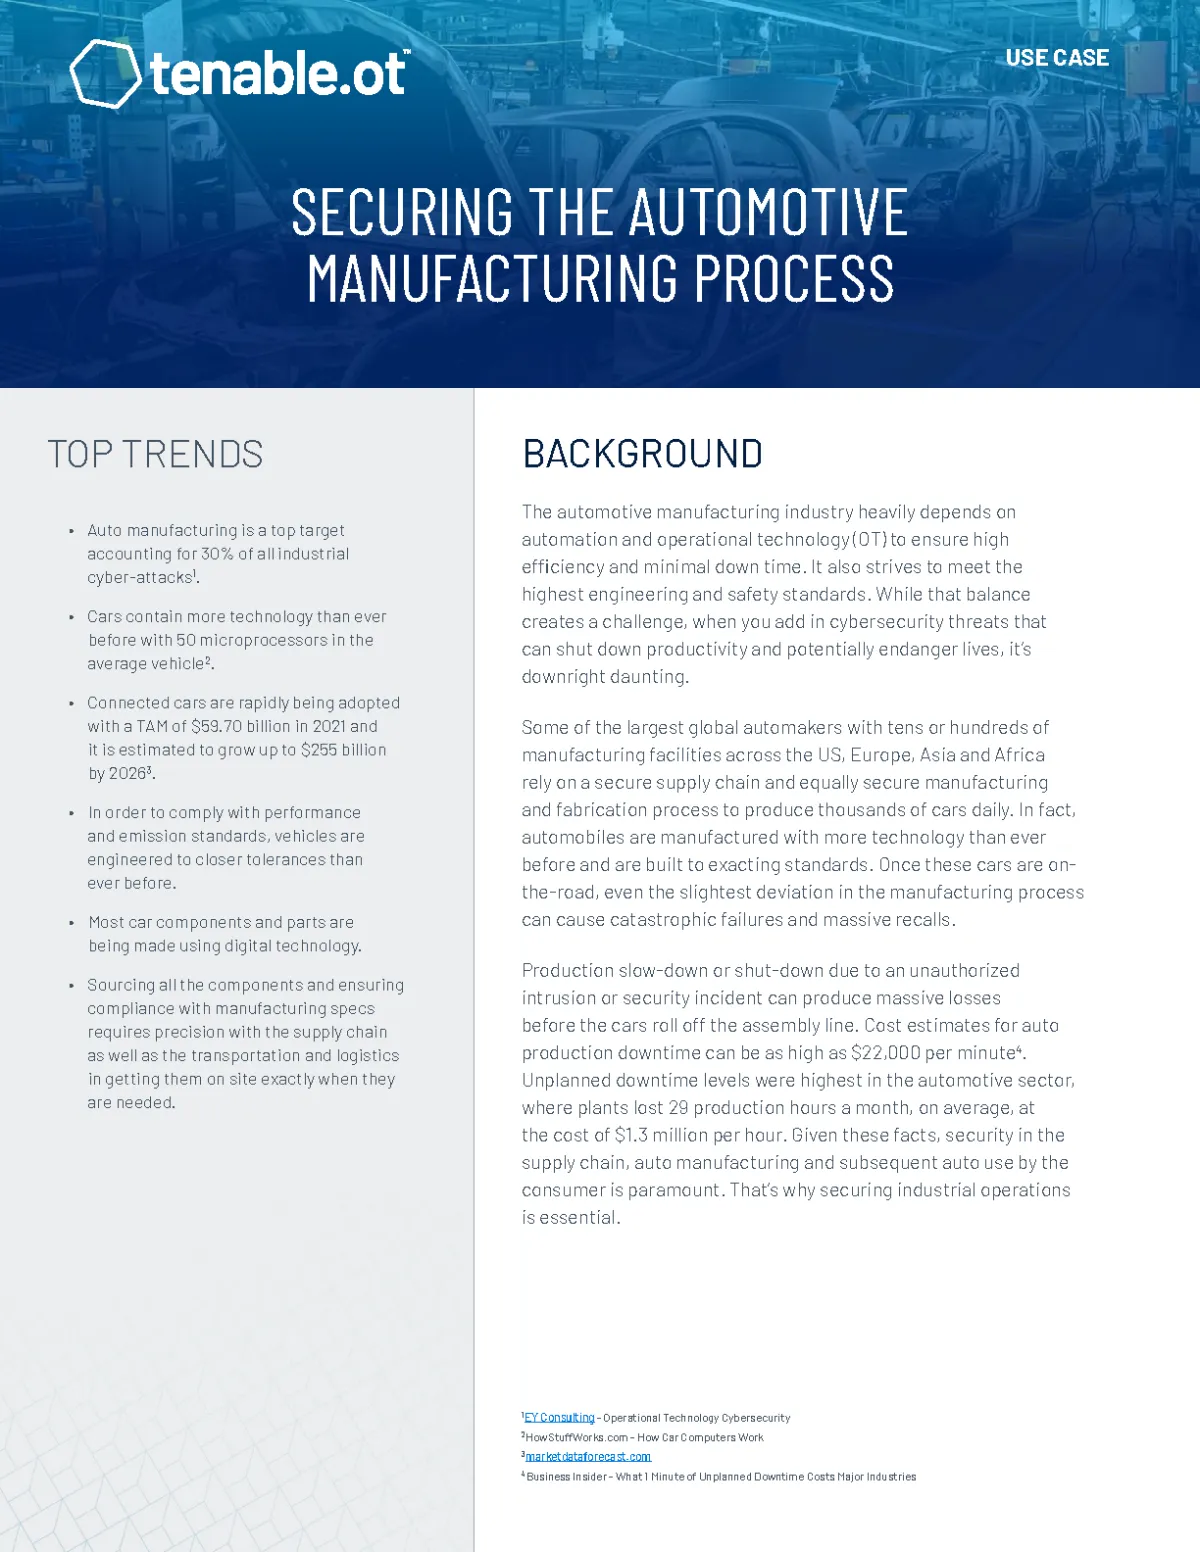 Use Case: Tenable.ot - Securing the Automotive Manufacturing Process